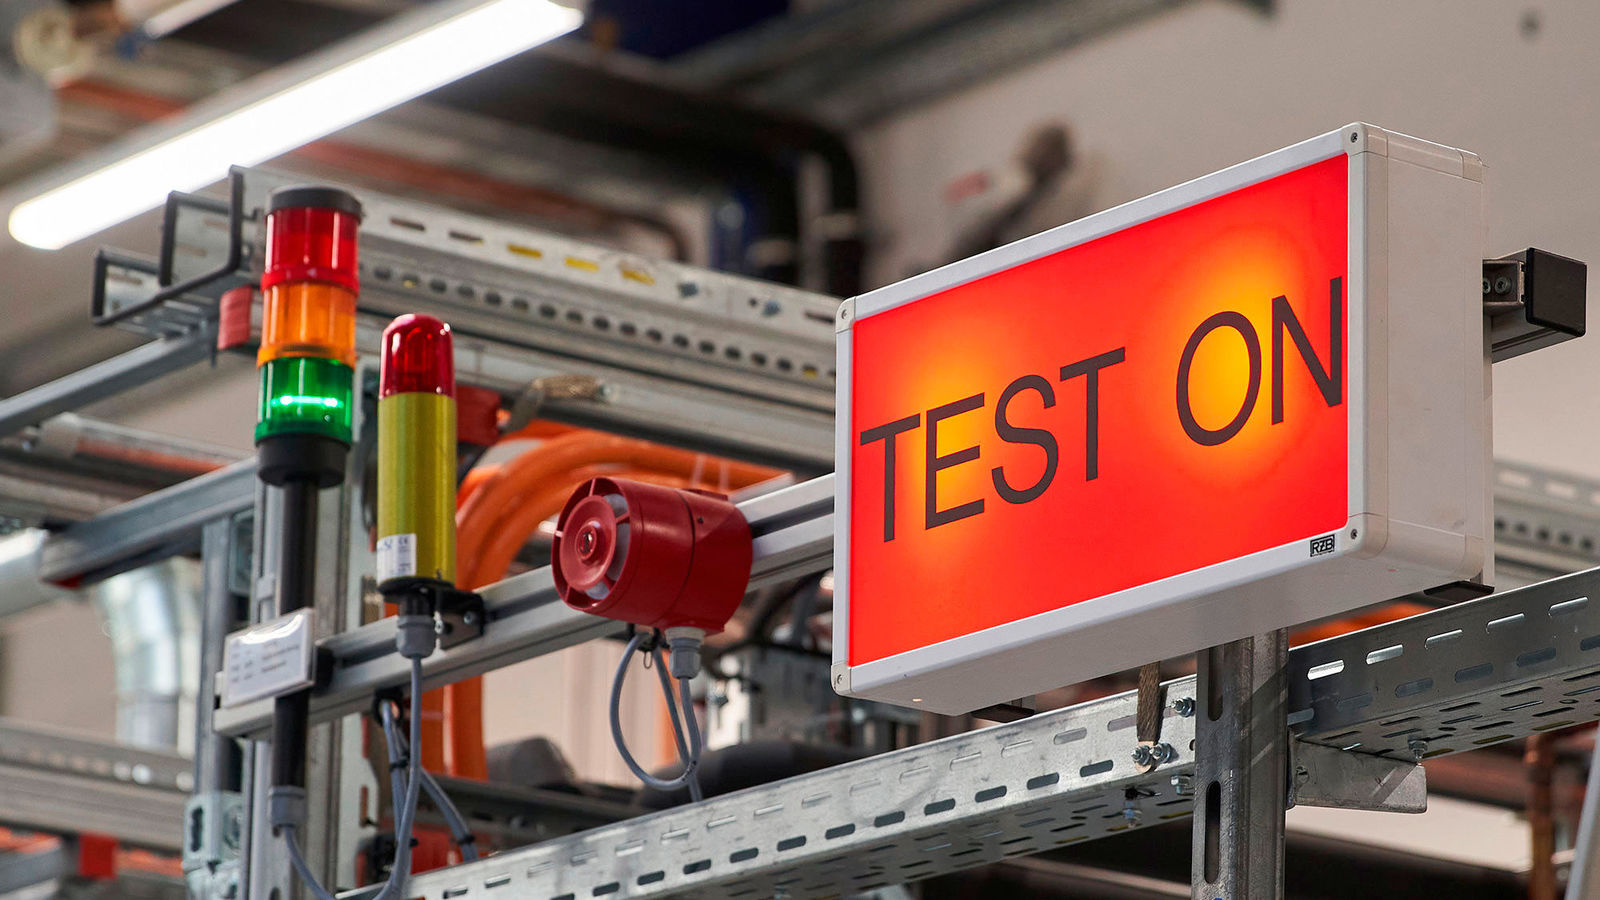 Story: “Every battery has to prove its safety in 5,000 tests”